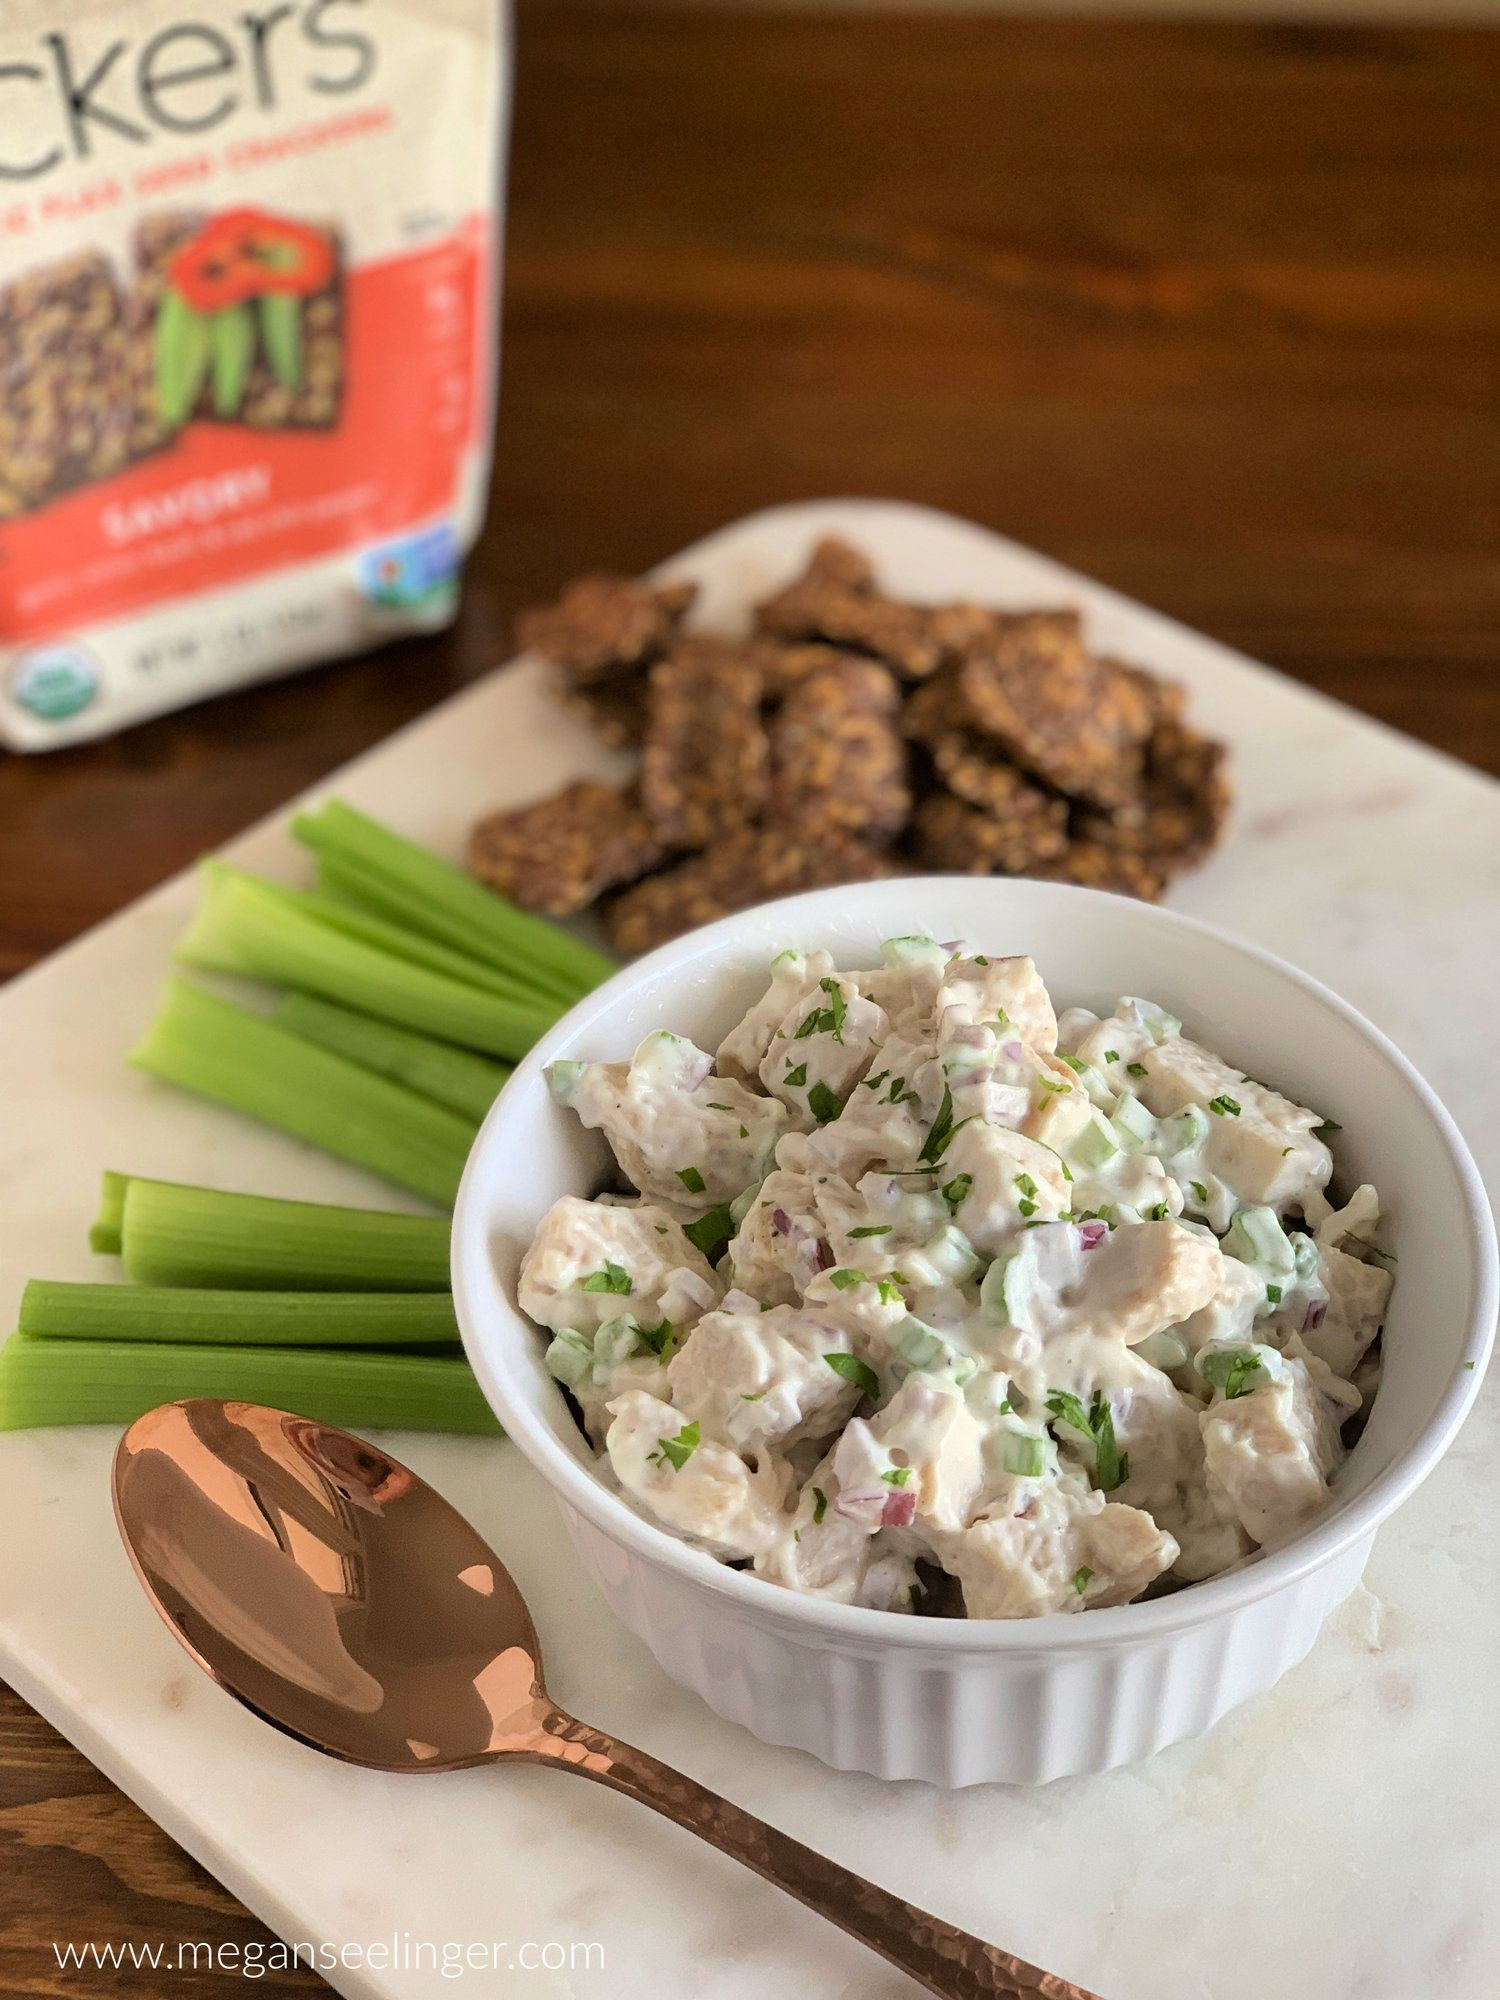 Leftover Chicken Keto
 Keto Chicken Salad Rotisserie Canned And Leftover